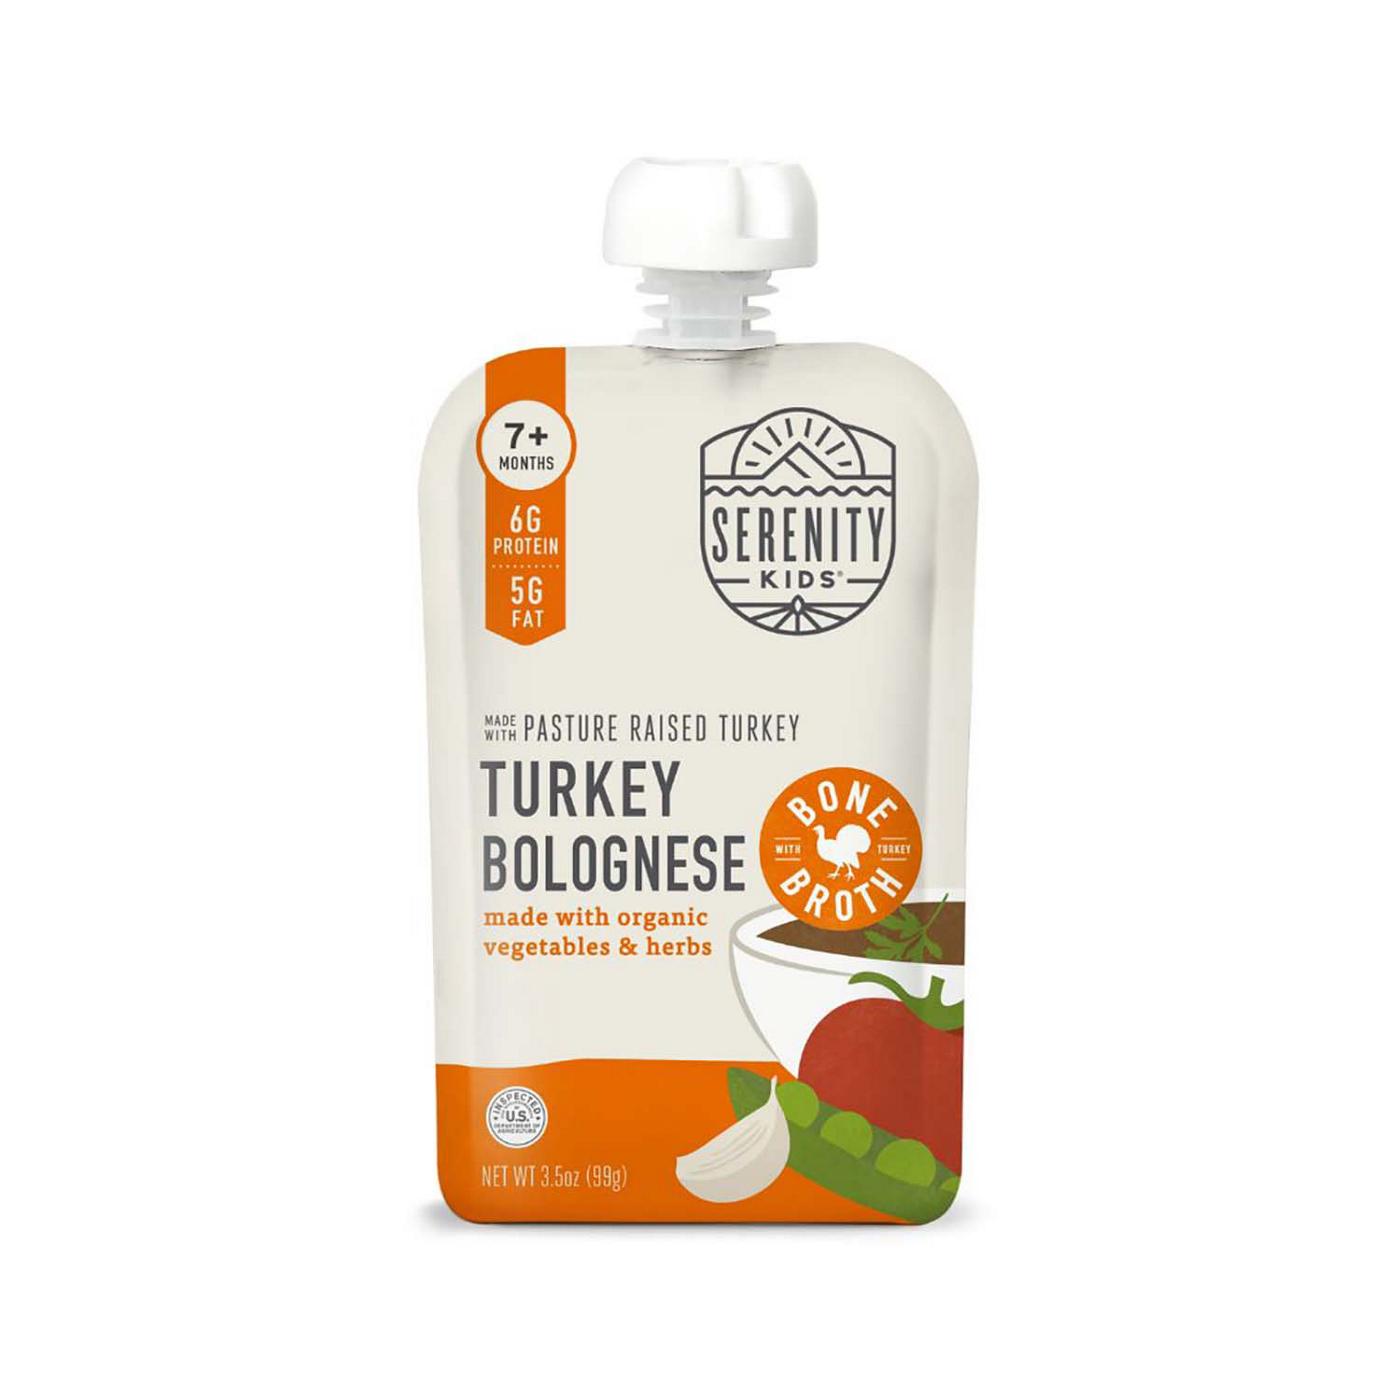 Serenity Kids Turkey Bolognese with Bone Broth Baby Food Pouch; image 1 of 4